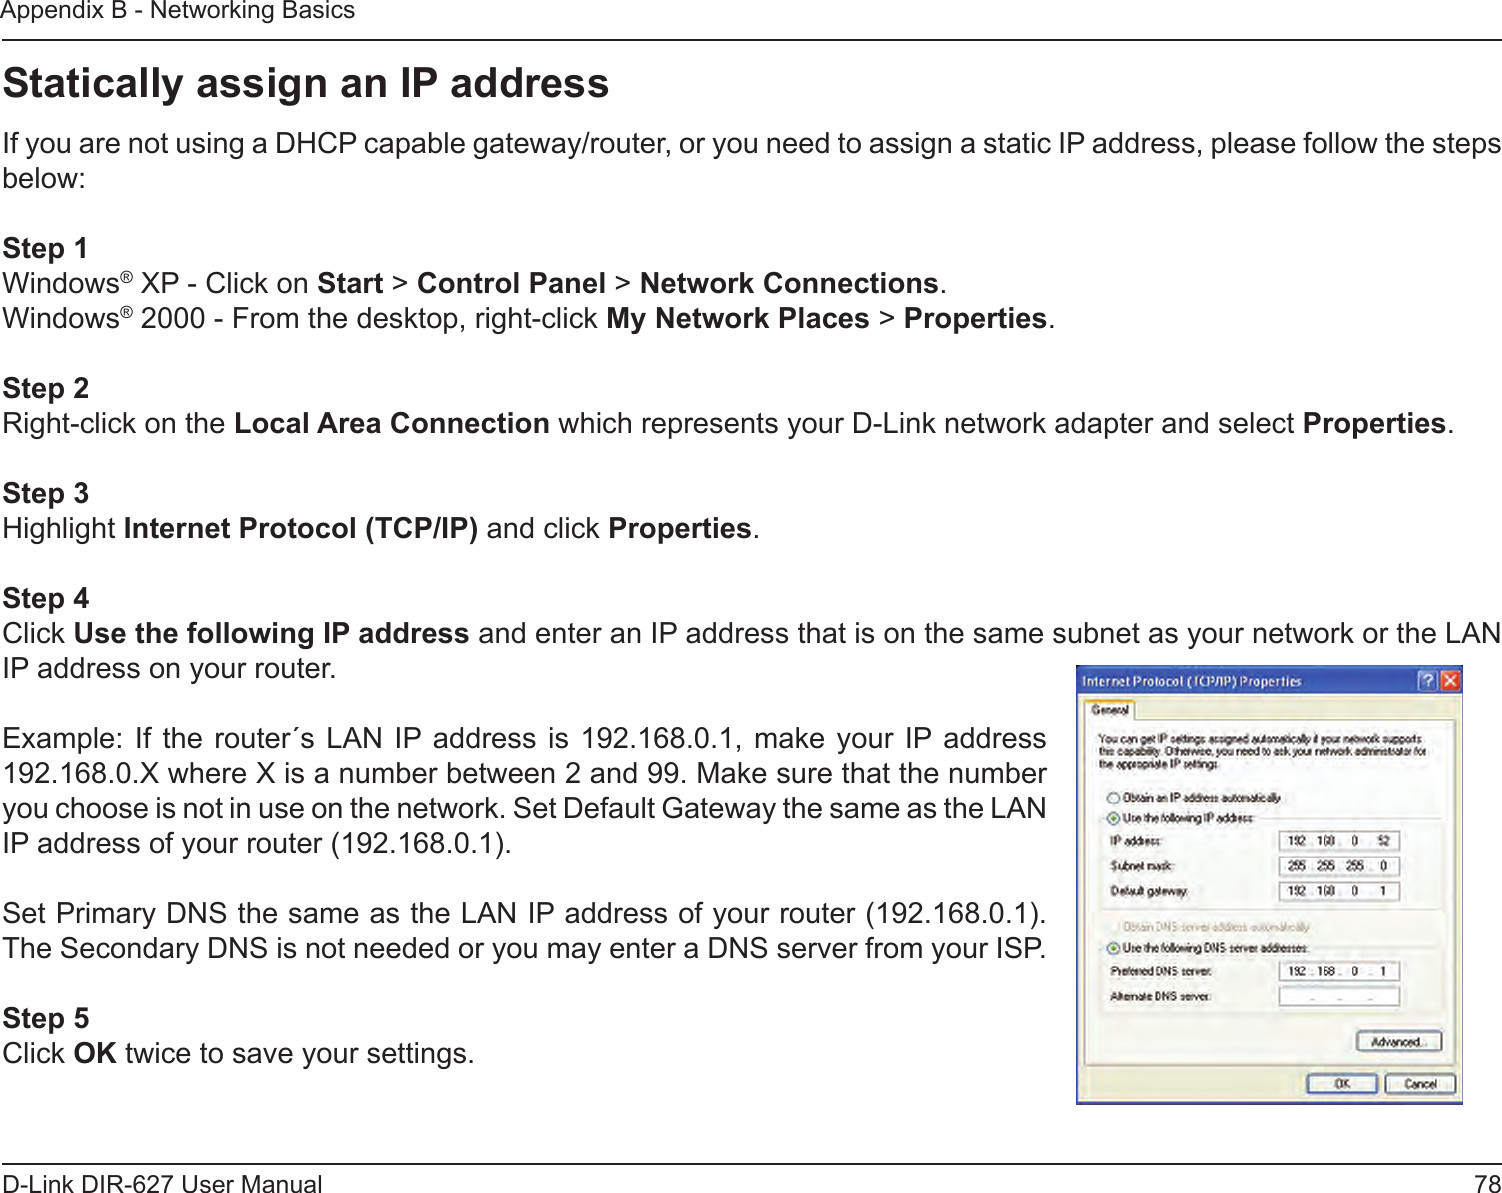 78D-Link DIR-627 User ManualAppendix B - Networking BasicsStaticallyassignanIPaddressIf you are not using a DHCP capable gateway/router, or you need to assign a static IP address, please follow the steps below:Step1Windows® XP - Click on Start &gt; Control Panel &gt; NetworkConnections.Windows® 2000 - From the desktop, right-click MyNetworkPlaces &gt; Properties.Step2Right-click on the LocalAreaConnection which represents your D-Link network adapter and select Properties.Step3Highlight InternetProtocol(TCP/IP) and click Properties.Step4Click UsethefollowingIPaddress and enter an IP address that is on the same subnet as your network or the LAN IP address on your router. Example: If  the  router´s  LAN IP address  is 192.168.0.1, make  your  IP address 192.168.0.X where X is a number between 2 and 99. Make sure that the number you choose is not in use on the network. Set Default Gateway the same as the LAN IP address of your router (192.168.0.1). Set Primary DNS the same as the LAN IP address of your router (192.168.0.1). The Secondary DNS is not needed or you may enter a DNS server from your ISP.Step5Click OK twice to save your settings.